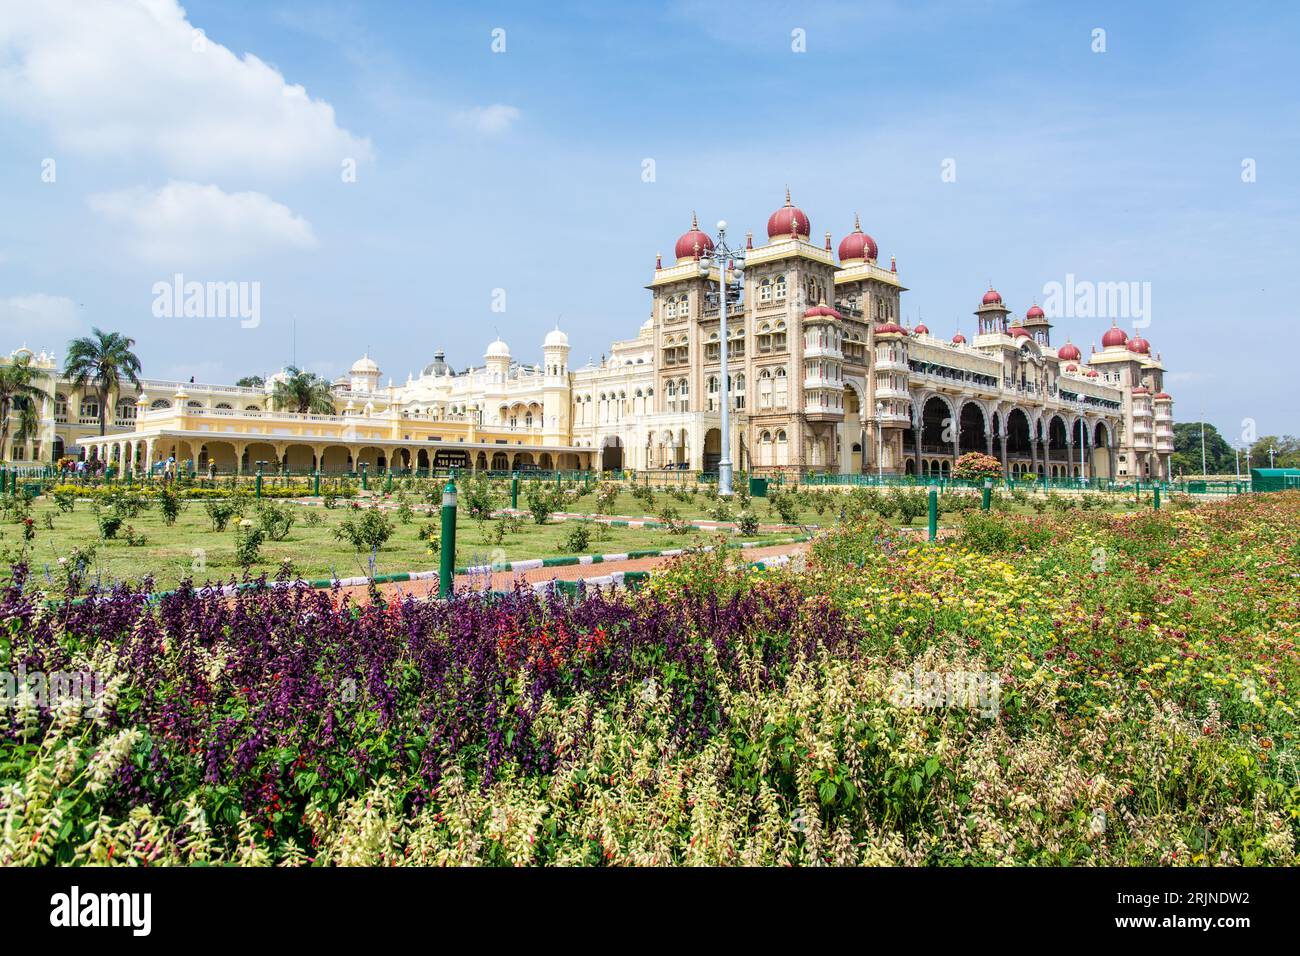 A closeup of a historical Amba Vilas Palace surrounded by lush flower beds in India Stock Photo